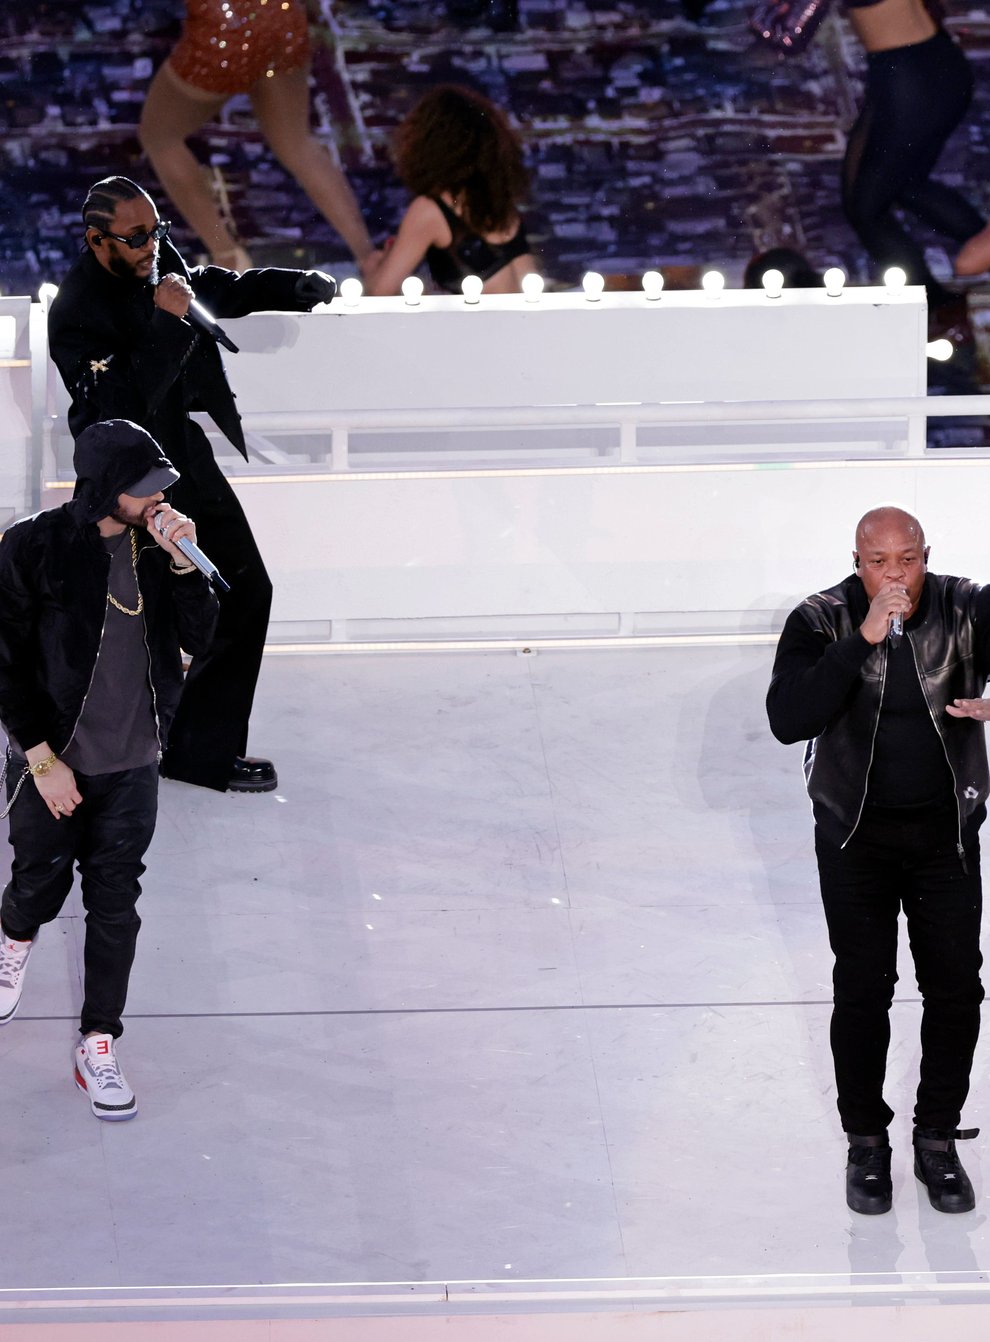 From left: Eminem, Kendrick Lamar, Dr Dre, Mary J Blige, 50 Cent and Snoop Dogg perform during the half-time show during the NFL SuperBowl 56 football game between the Los Angeles Rams and the Cincinnati Bengals on February 13, 2022 in Inglewood, California (Adam Hunger/AP)